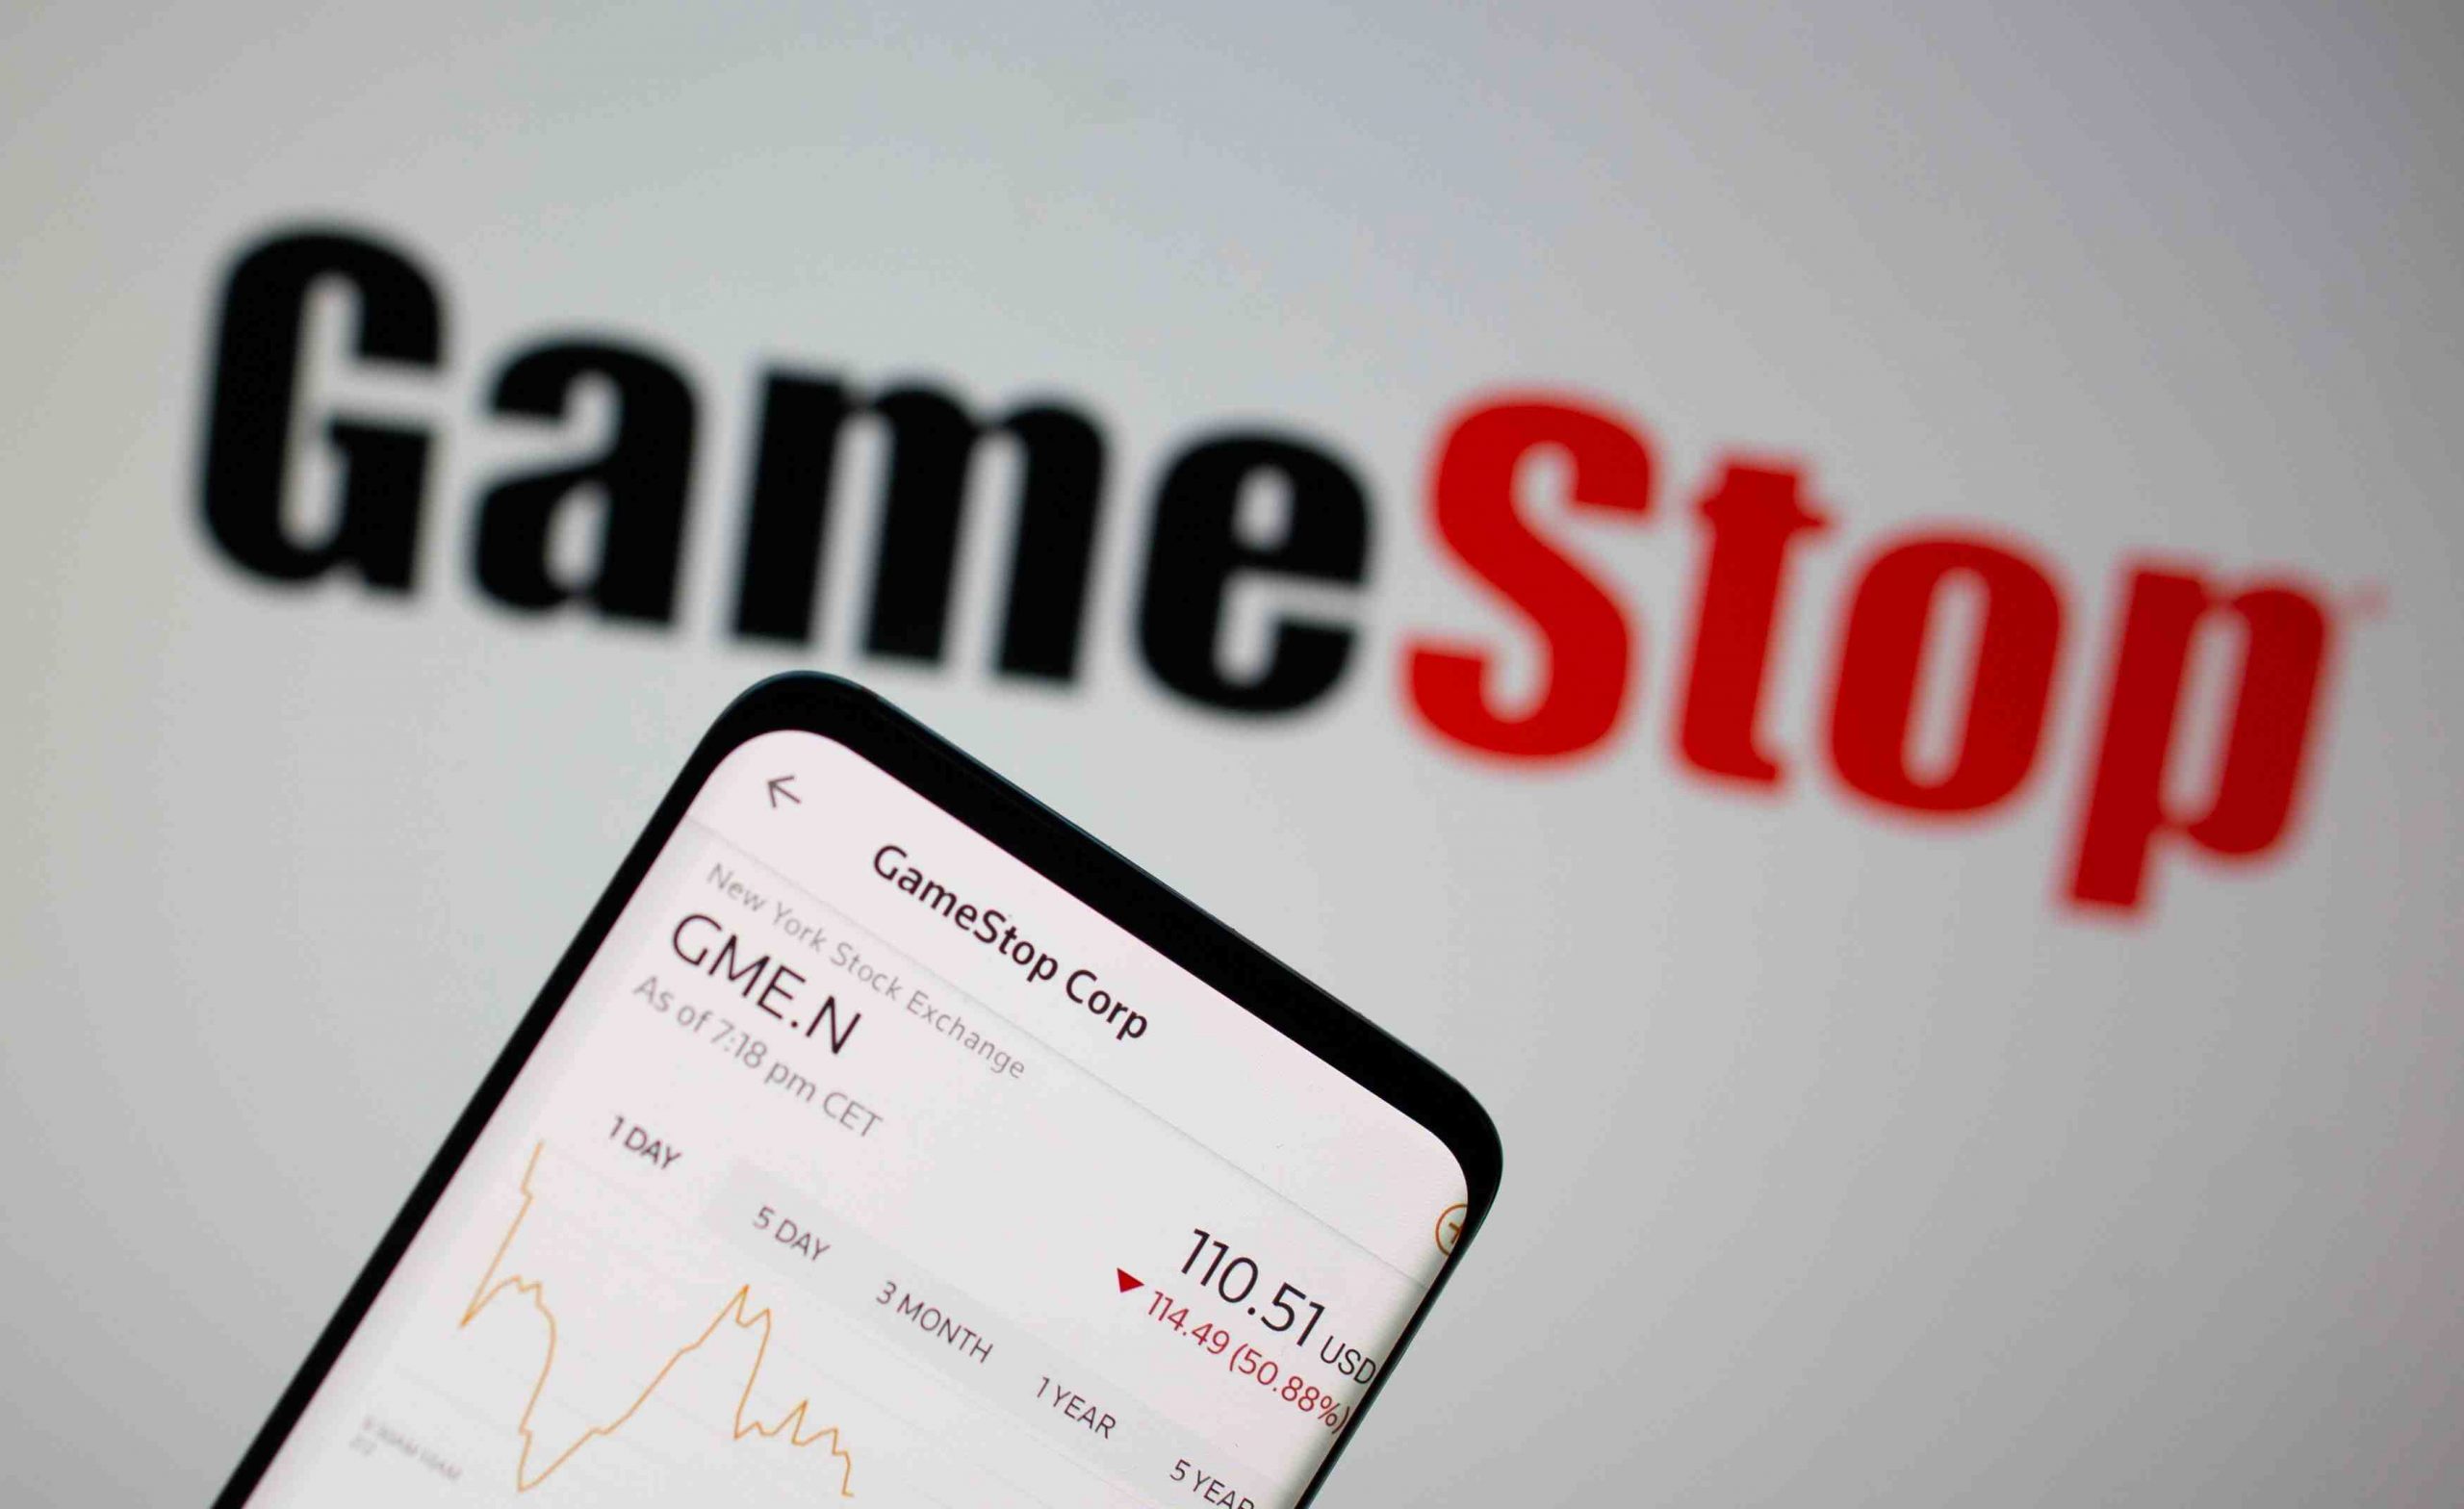 gamestop-stock-graph-is-seen-in-front-of-the-company-s-logo-japan-forward